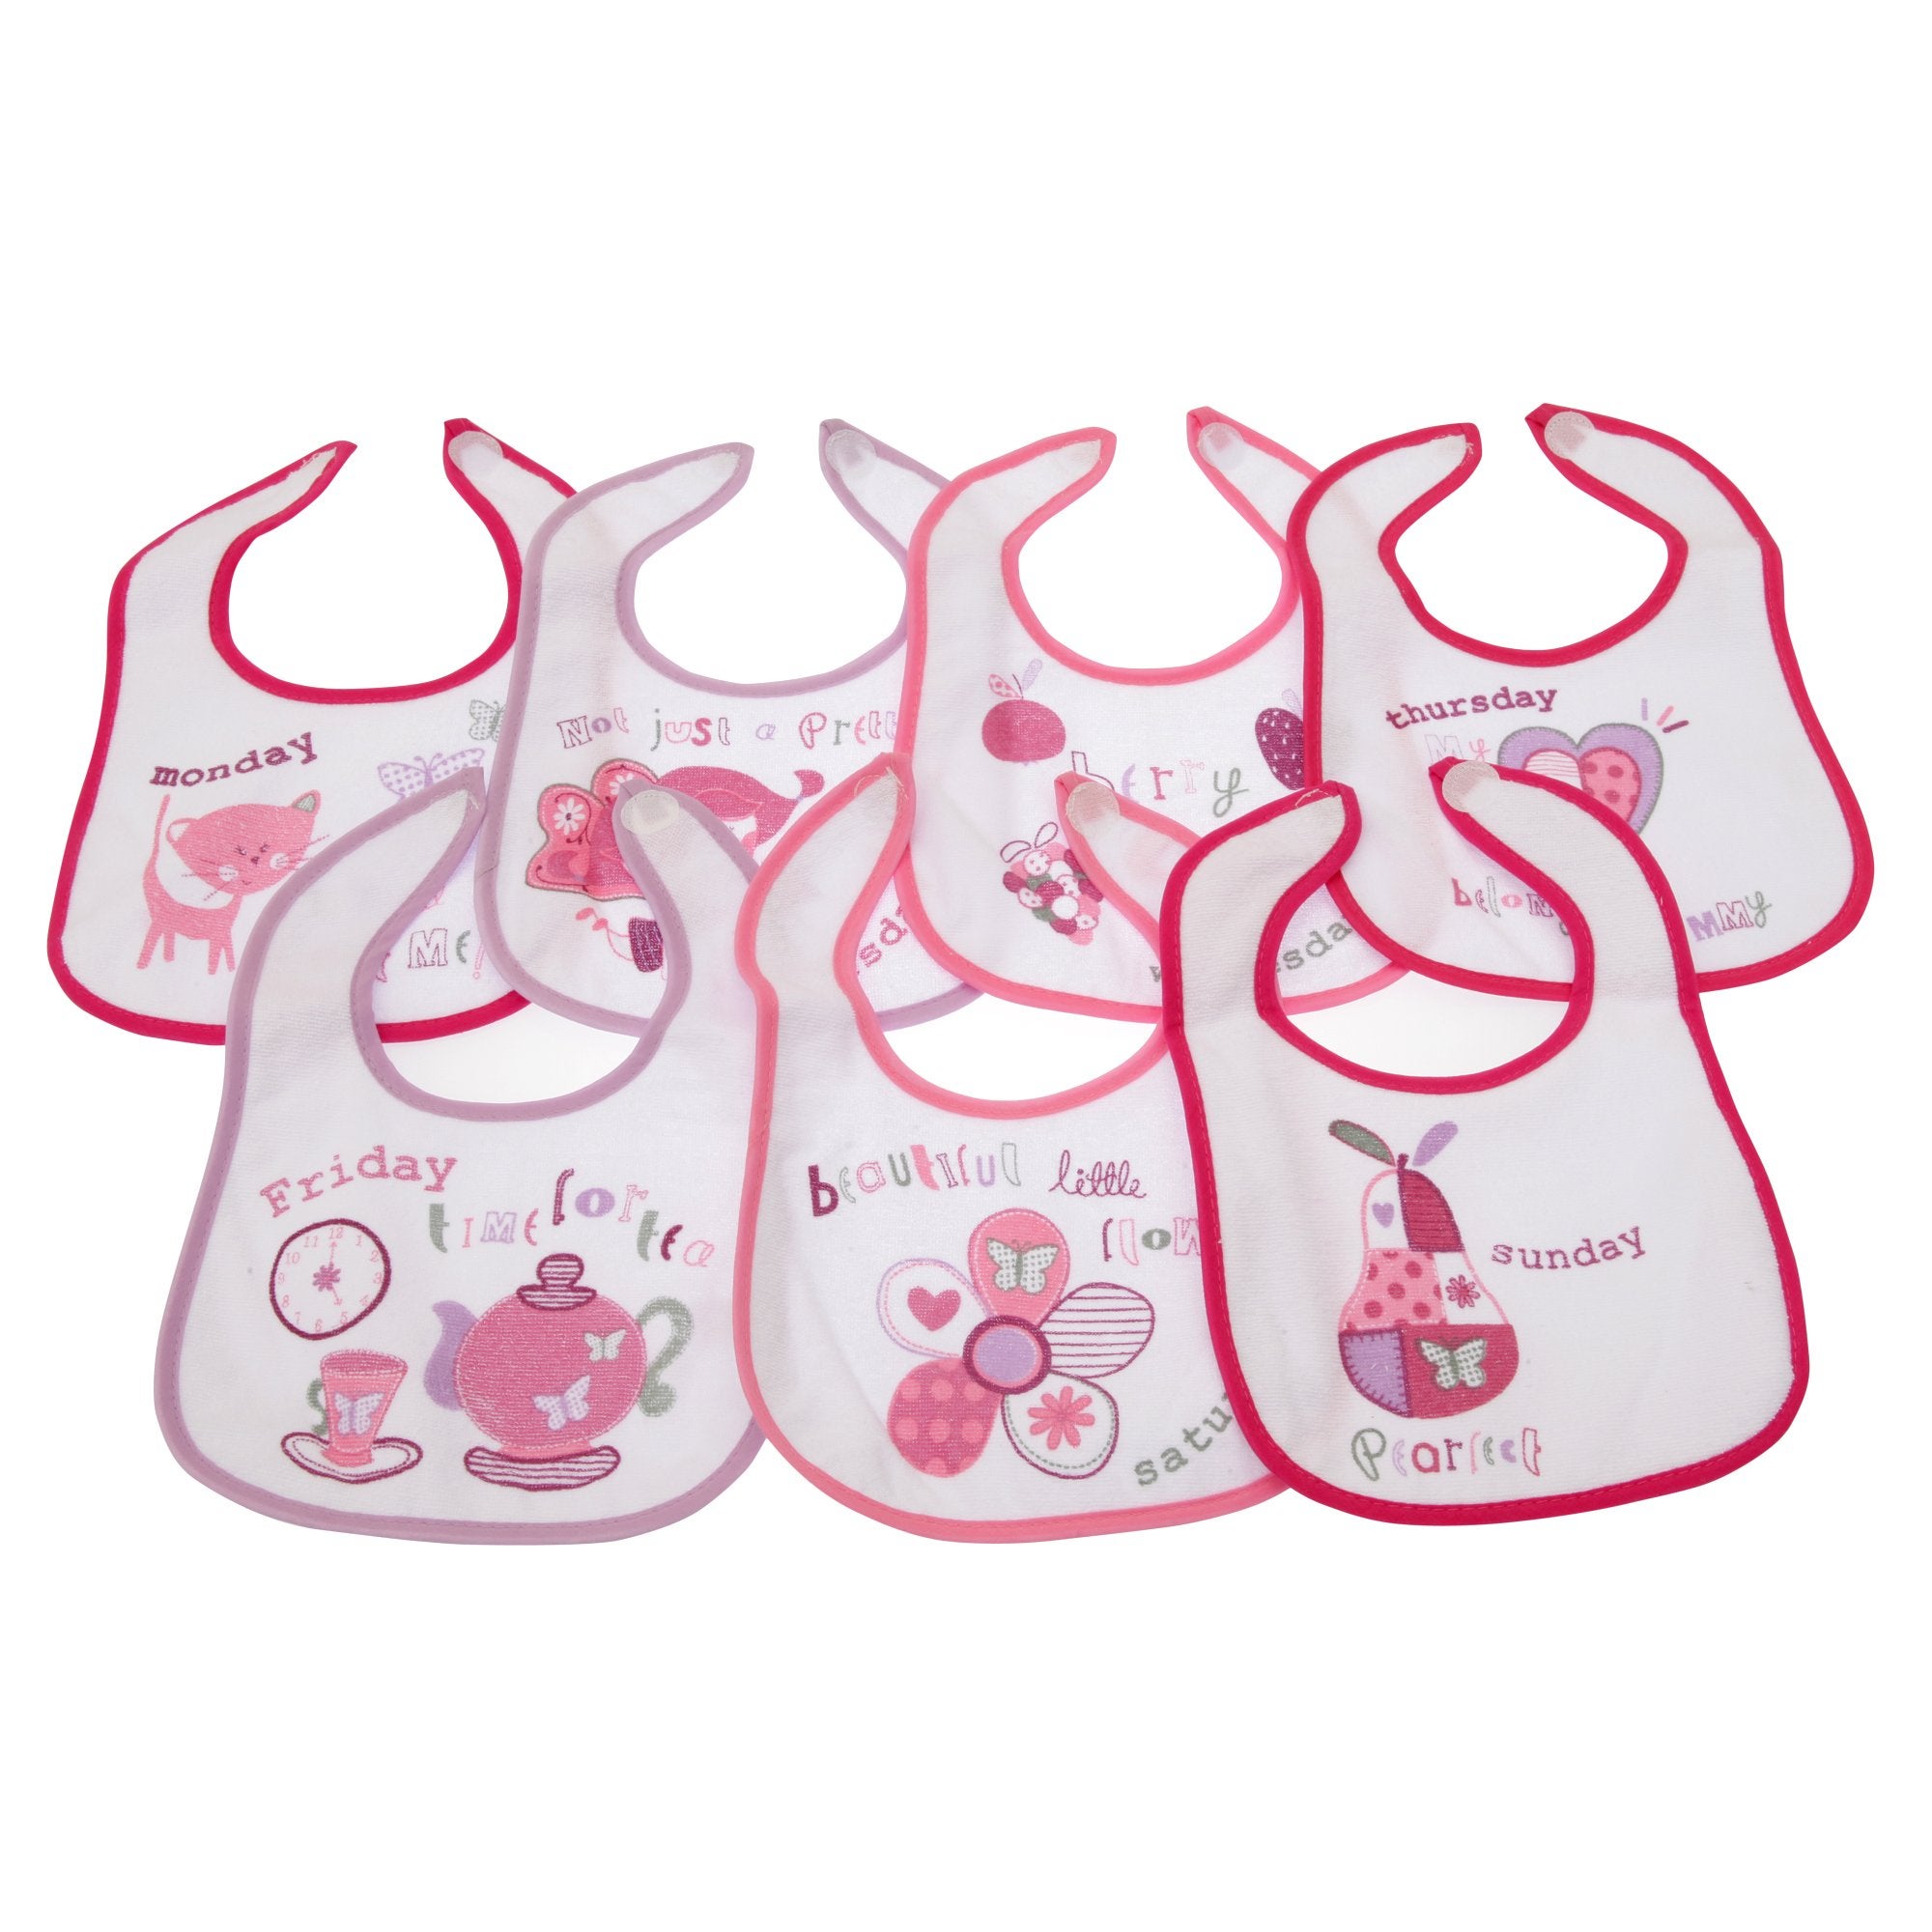 Baby Patterned 7 Days Of The Week Bibs In Boys & Girls Options (Pack Of 7)